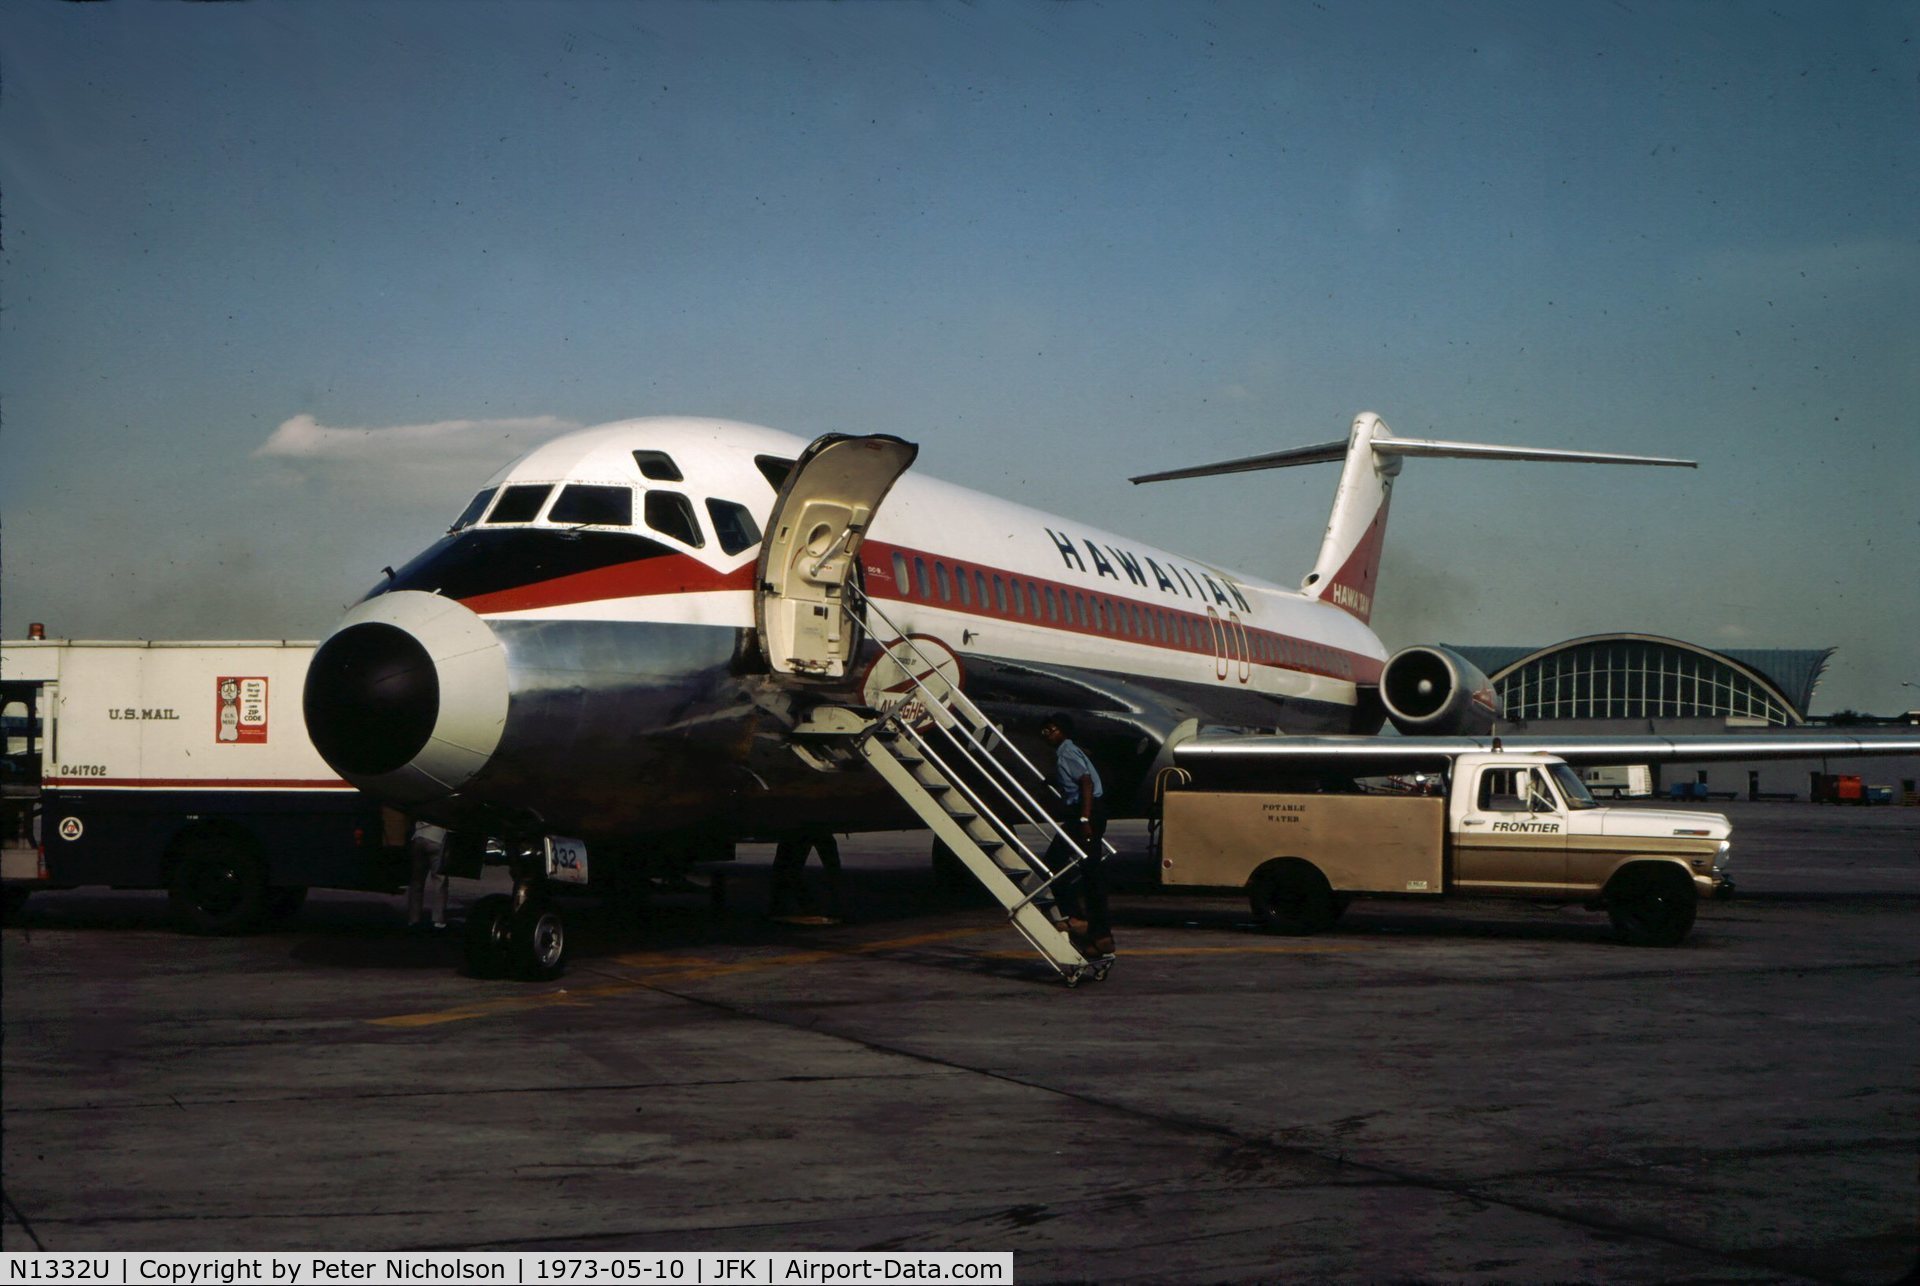 N1332U, 1969 Douglas DC-9-31 C/N 47404, Operated by Allegheny Airlines from Hawaiian Air in 1973 and seen preparing for flight to St. Louis, Missouri